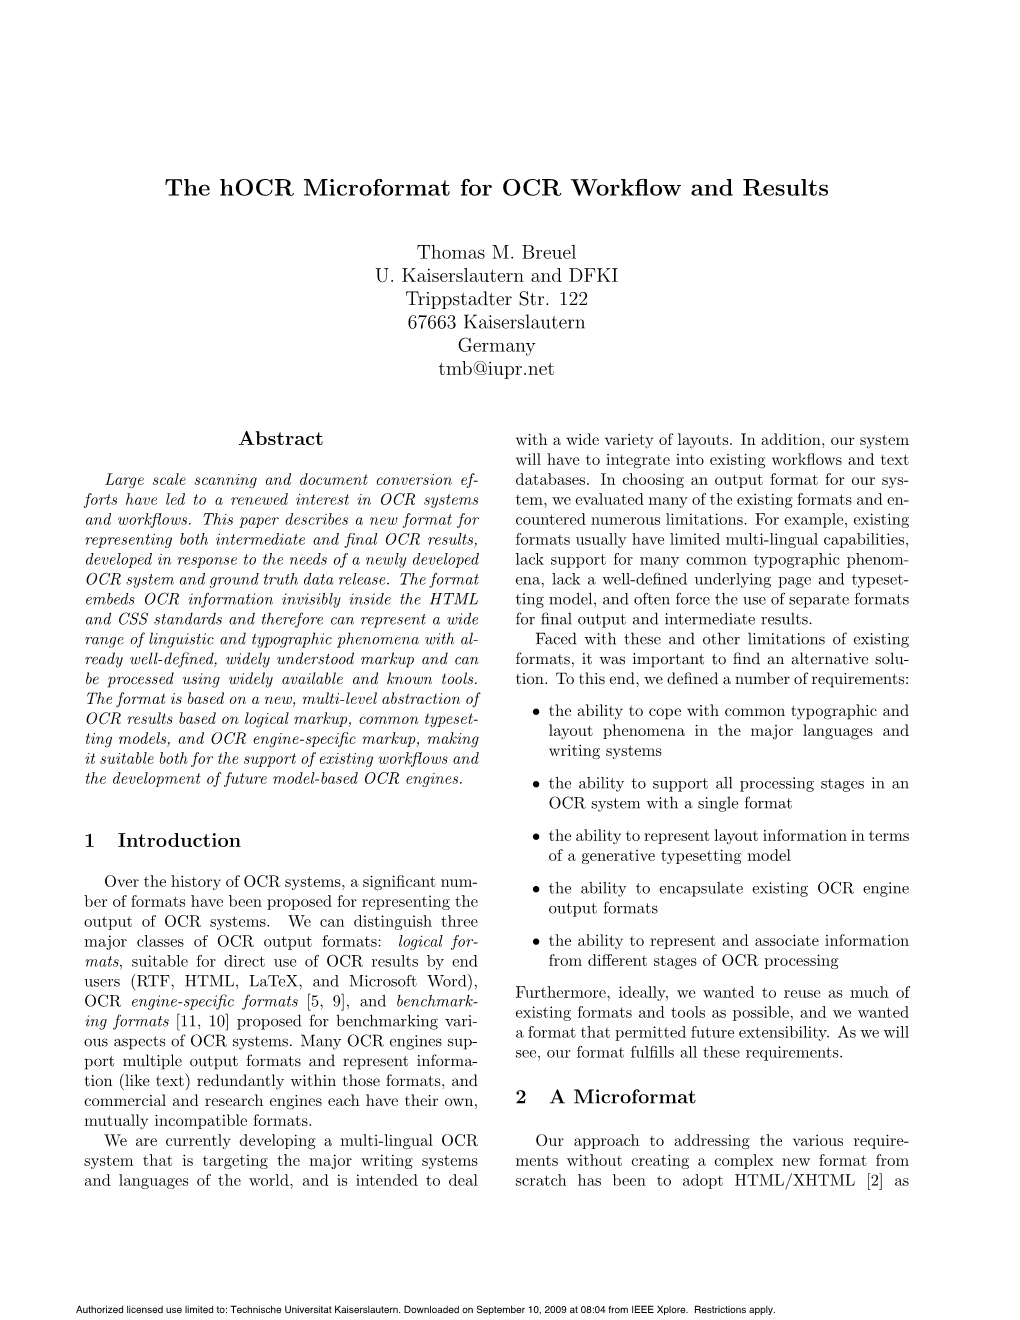 The Hocr Microformat for OCR Workflow and Results